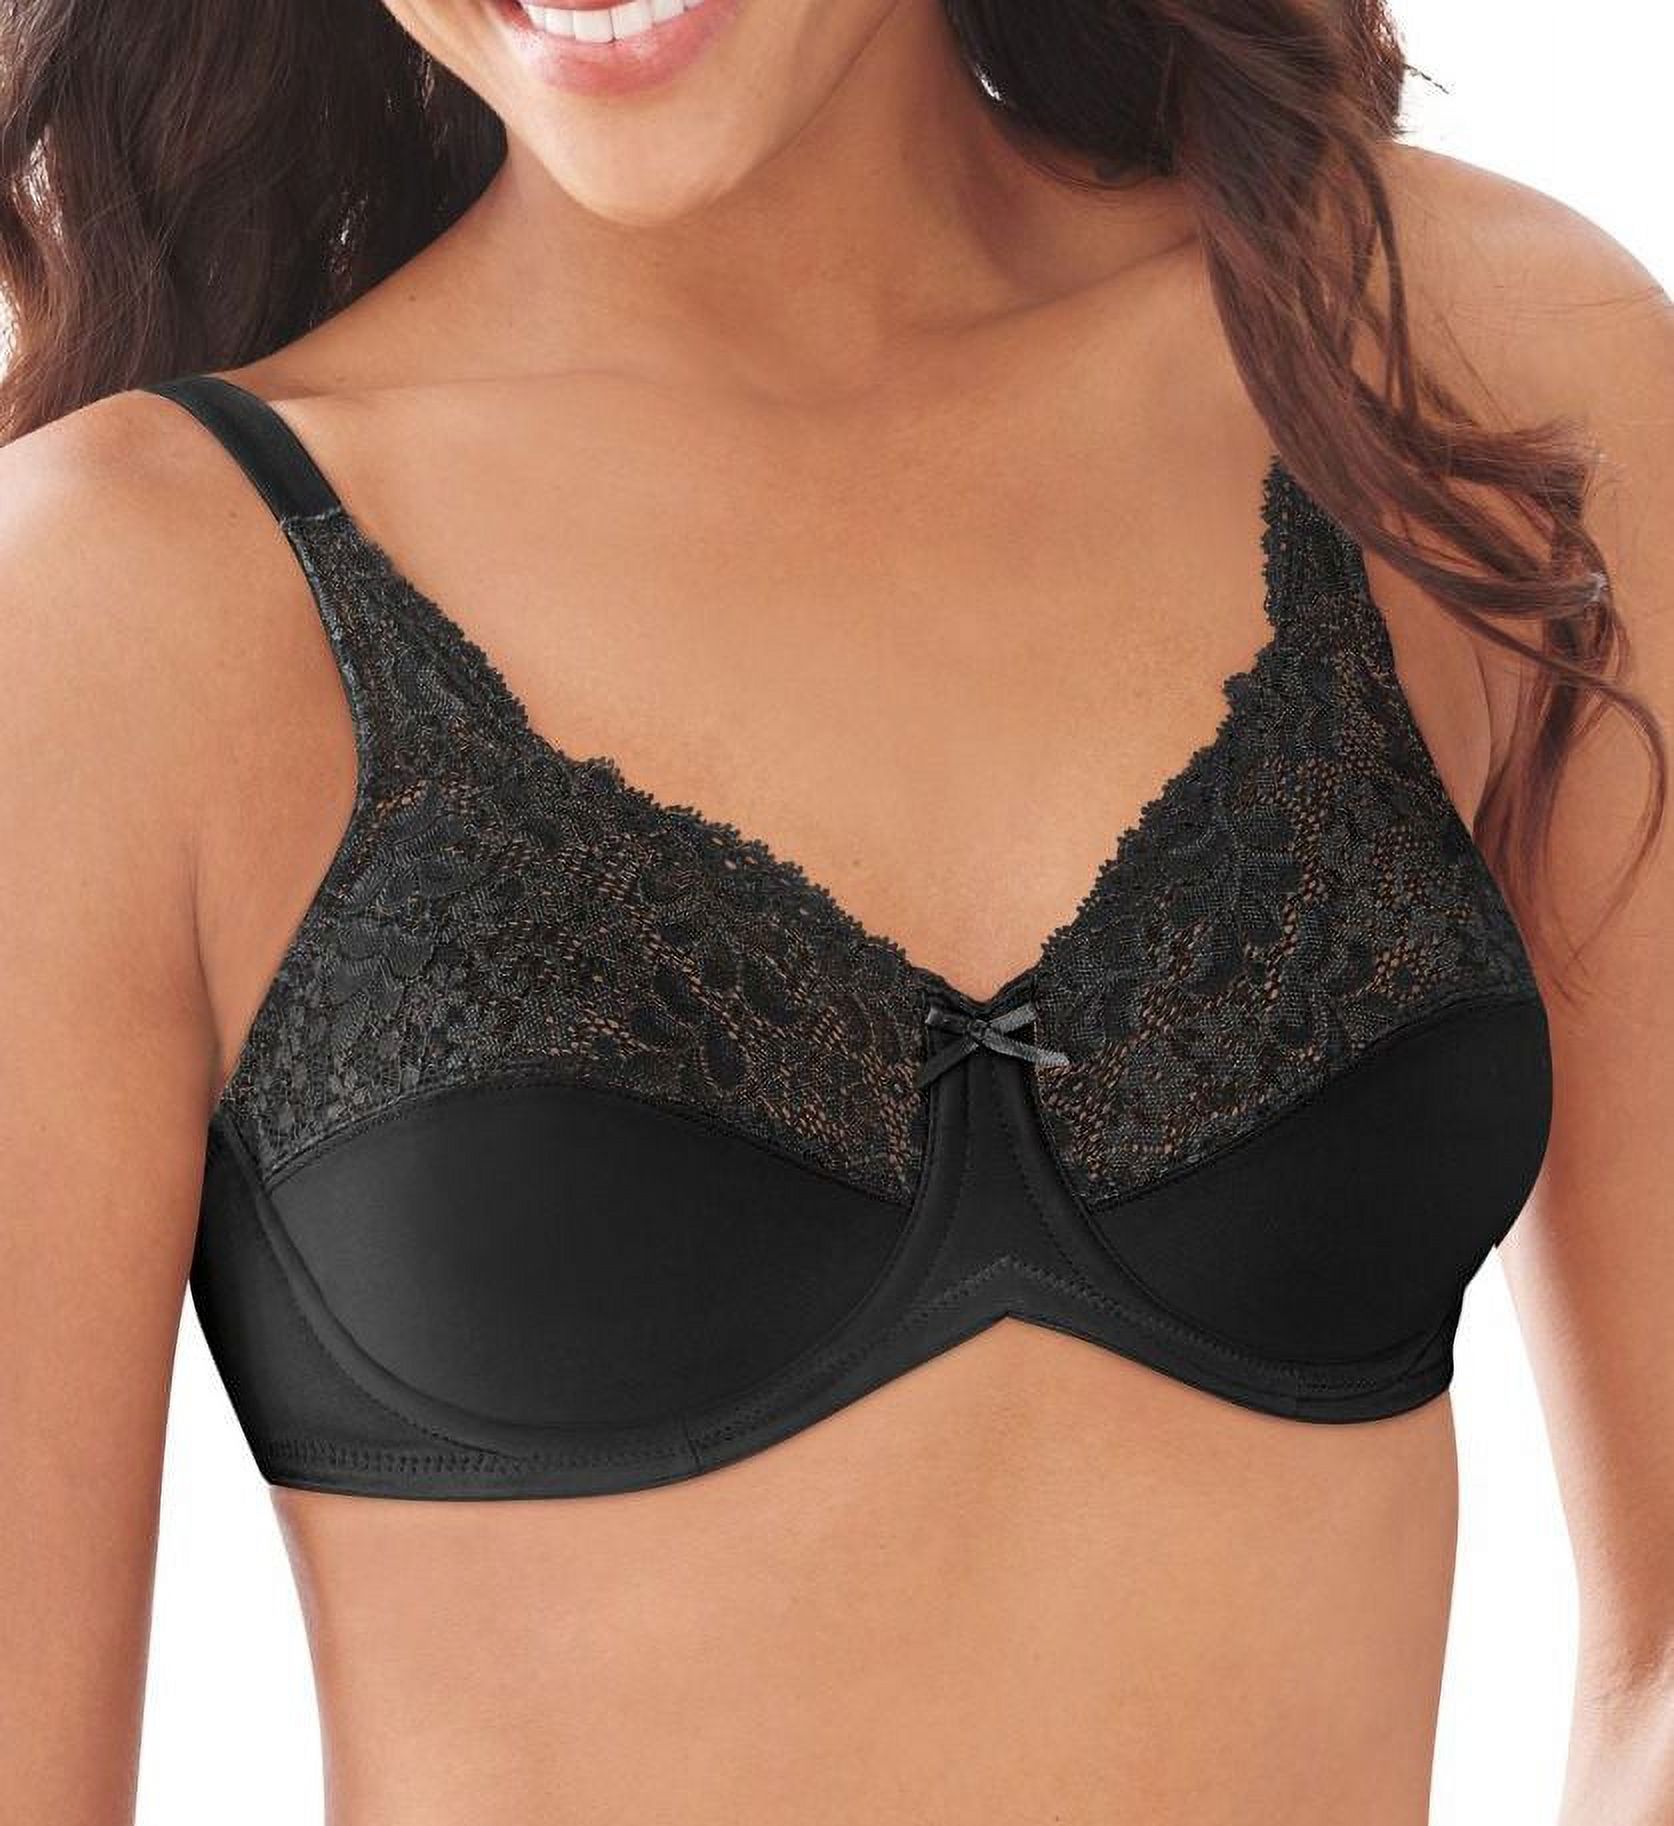 Lilyette By Bali Minimizer Underwire Bra Womens Full Coverage Seamless LY0428 - image 1 of 3